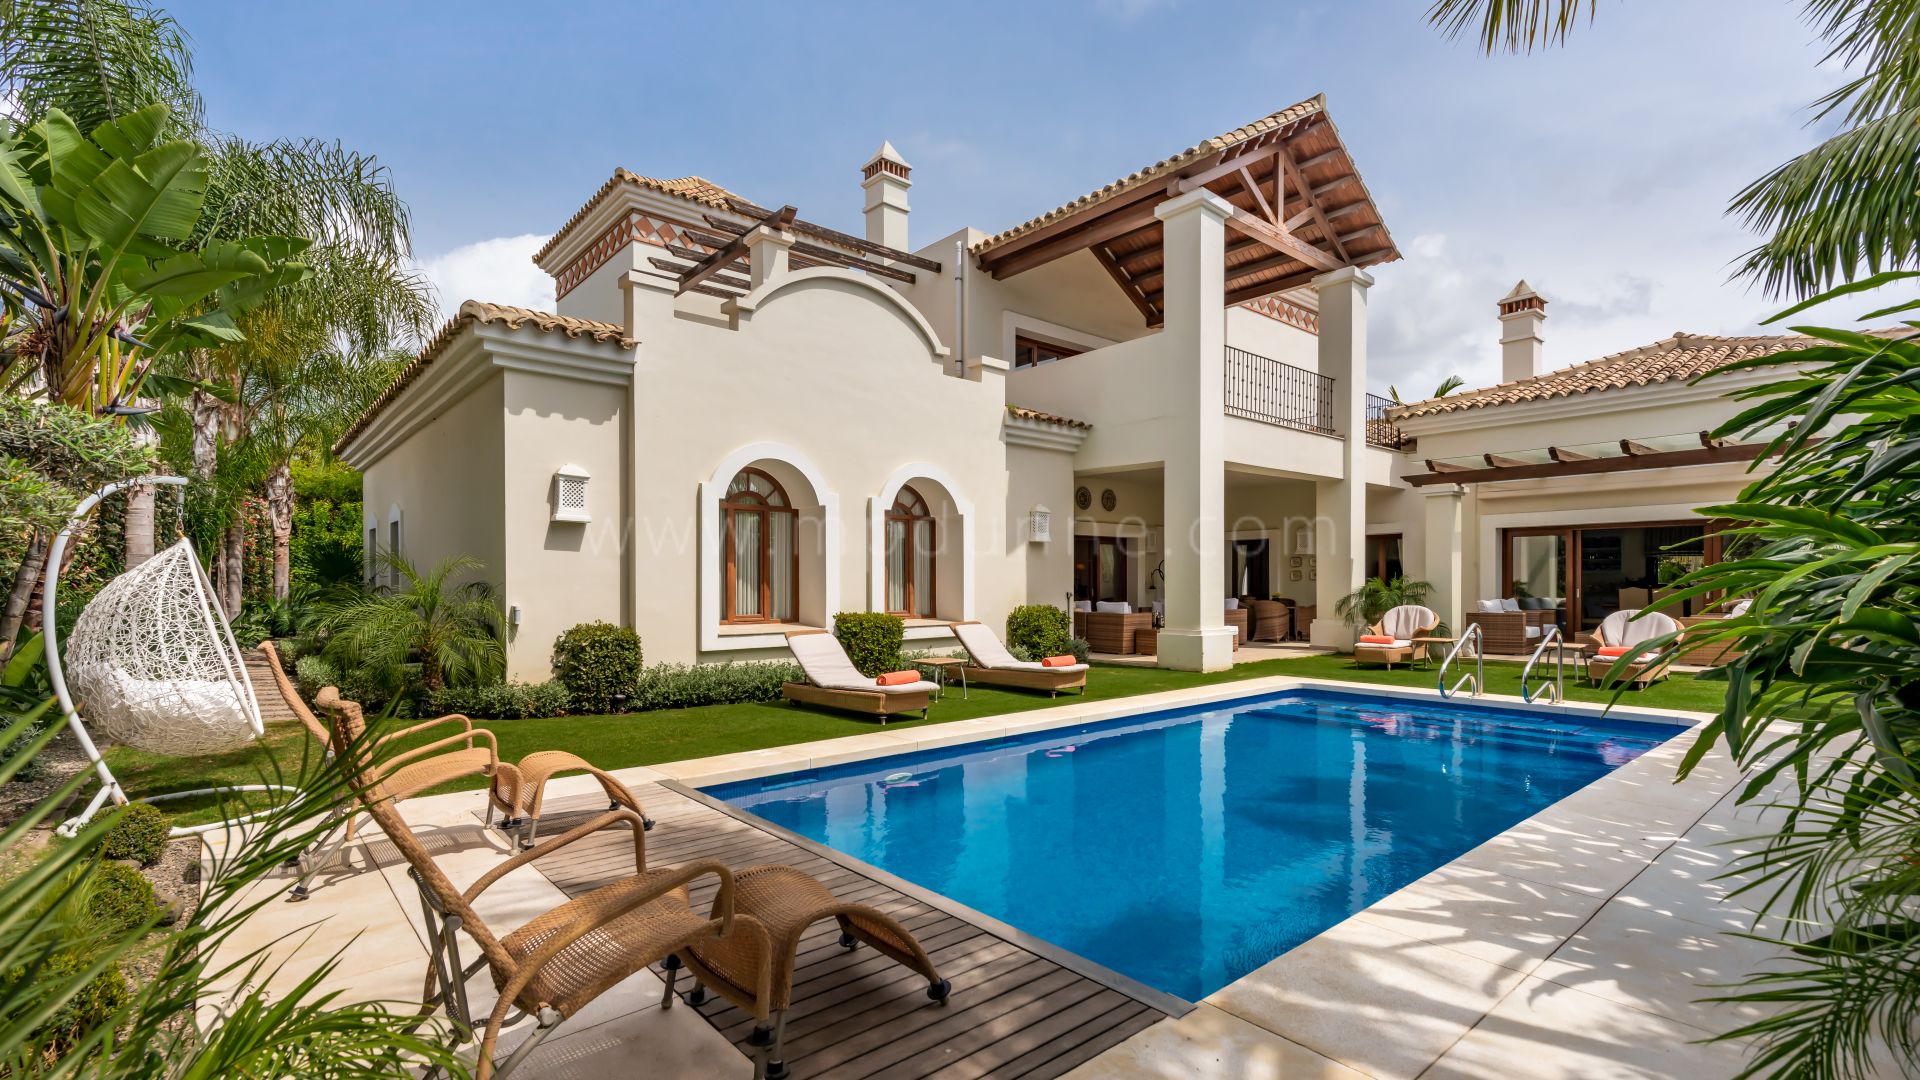 Six-bedroom Villa in Casablanca within 500 meters from the Beach